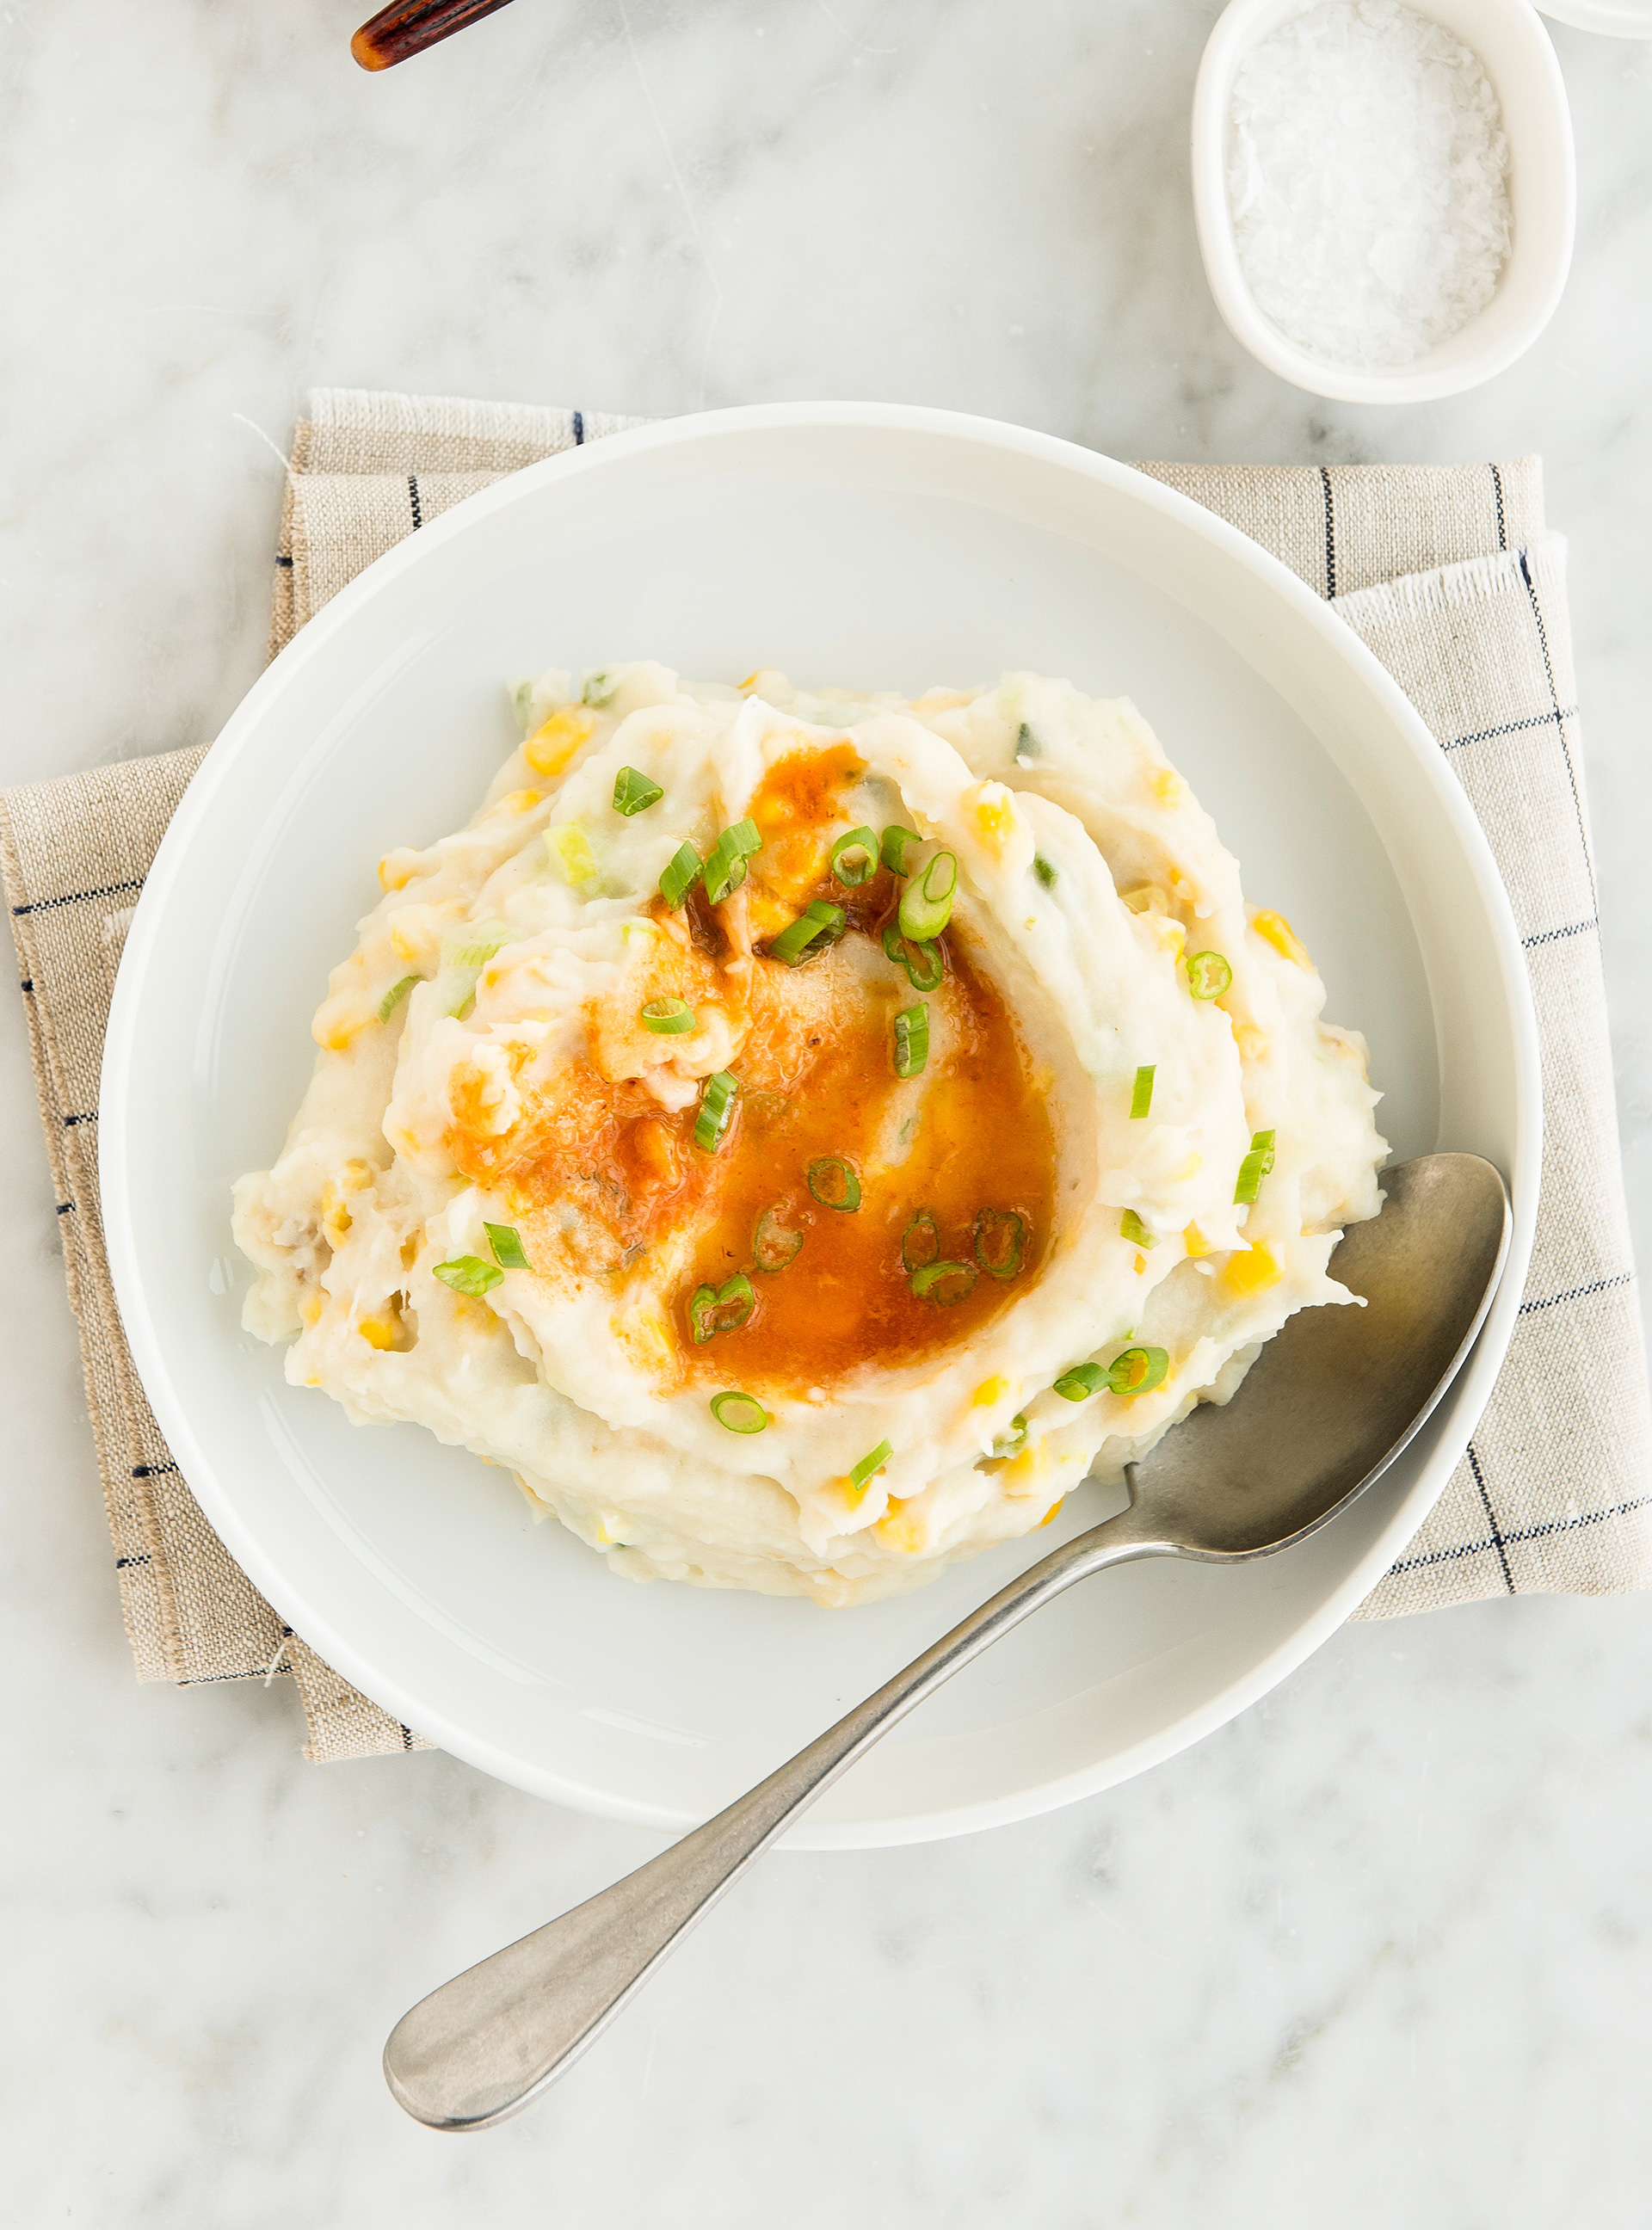 Mashed Potatoes with Corn and Harissa Butter